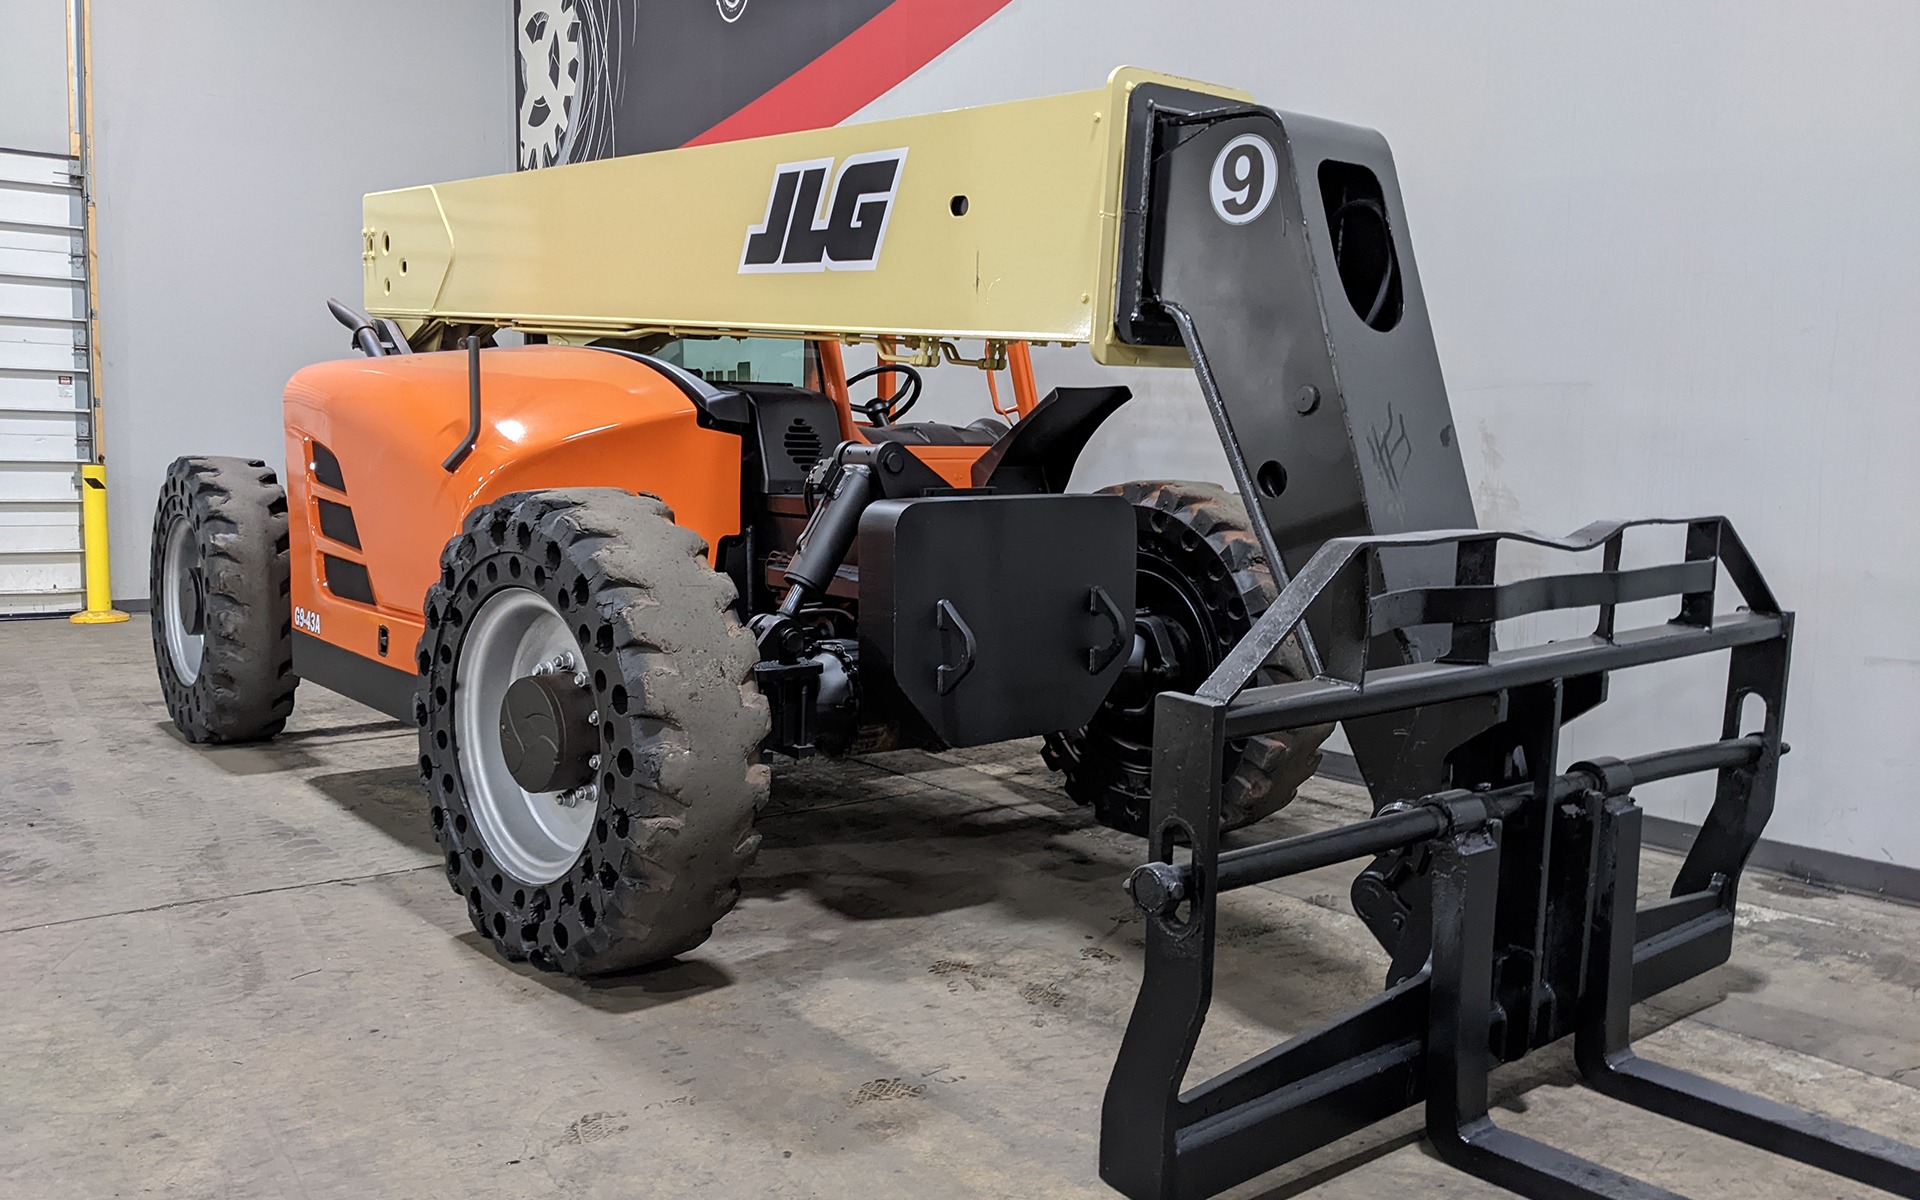 Used 2013 JLG G9-43A  | Cary, IL